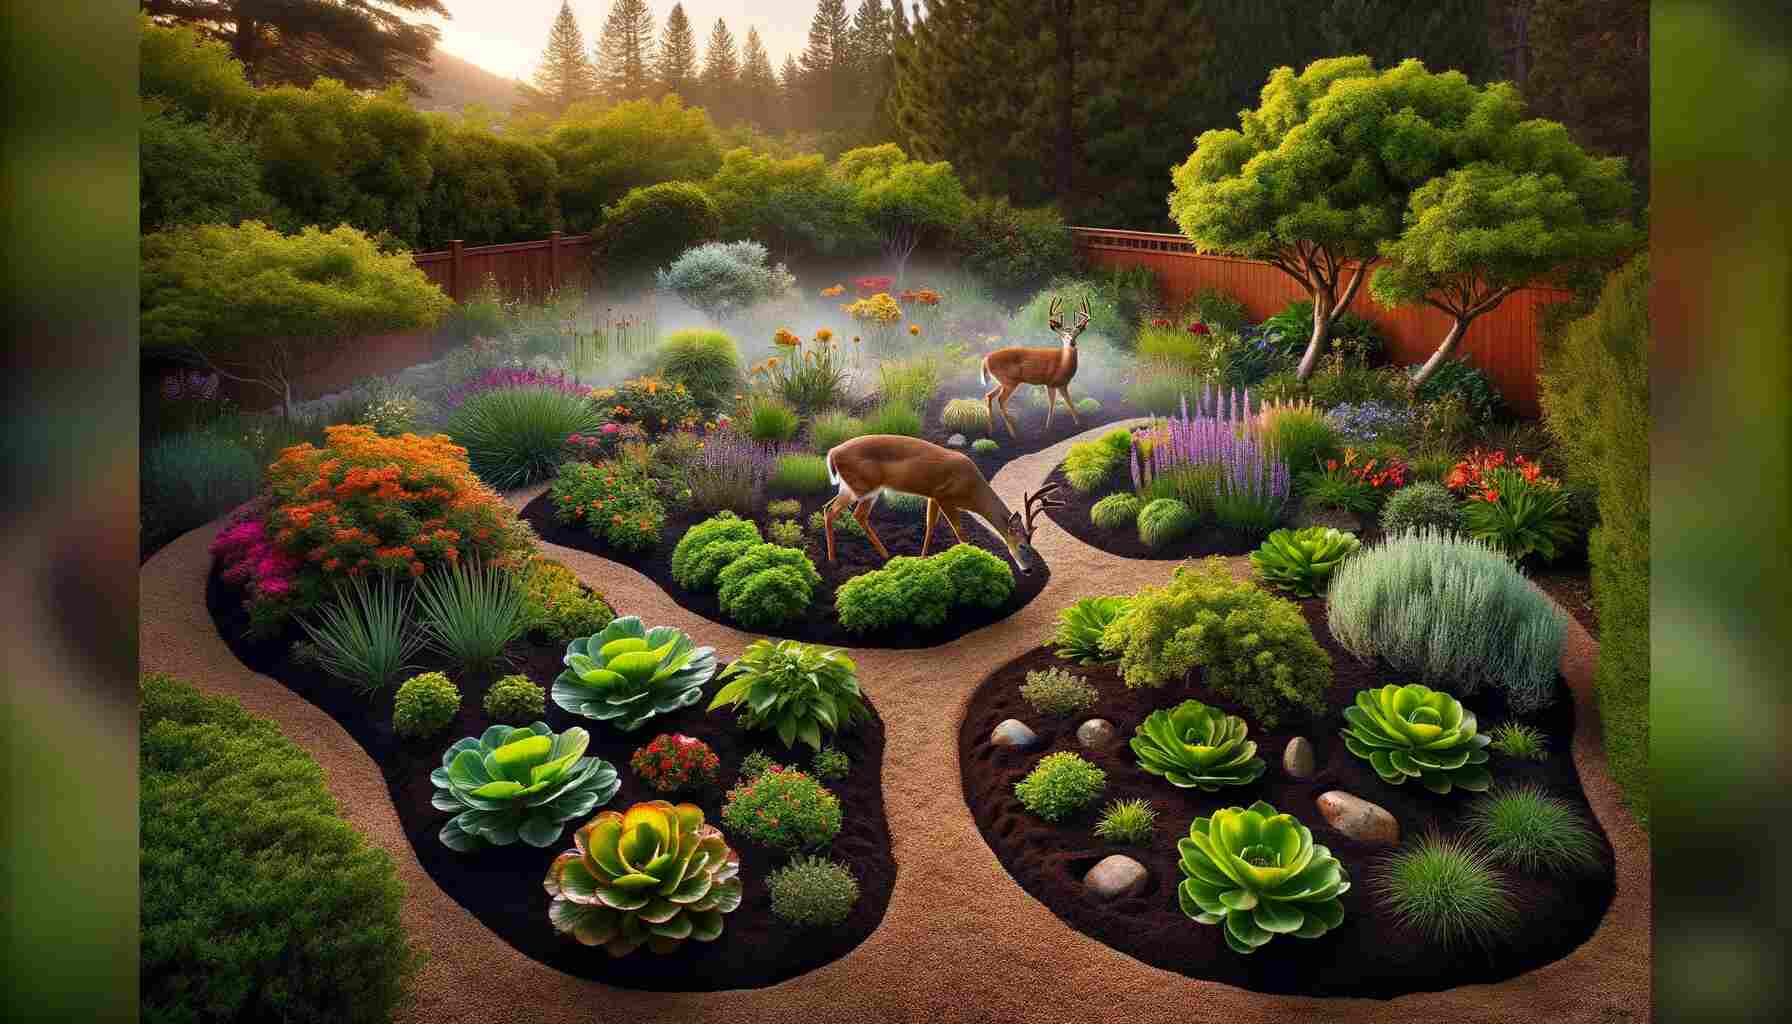 Here is the featured image for Do Coffee Grounds Keep Deer Away from Plants. The image showcases a serene garden with lush plants surrounded by coffee grounds, and a deer in the background, deterred by the coffee grounds.